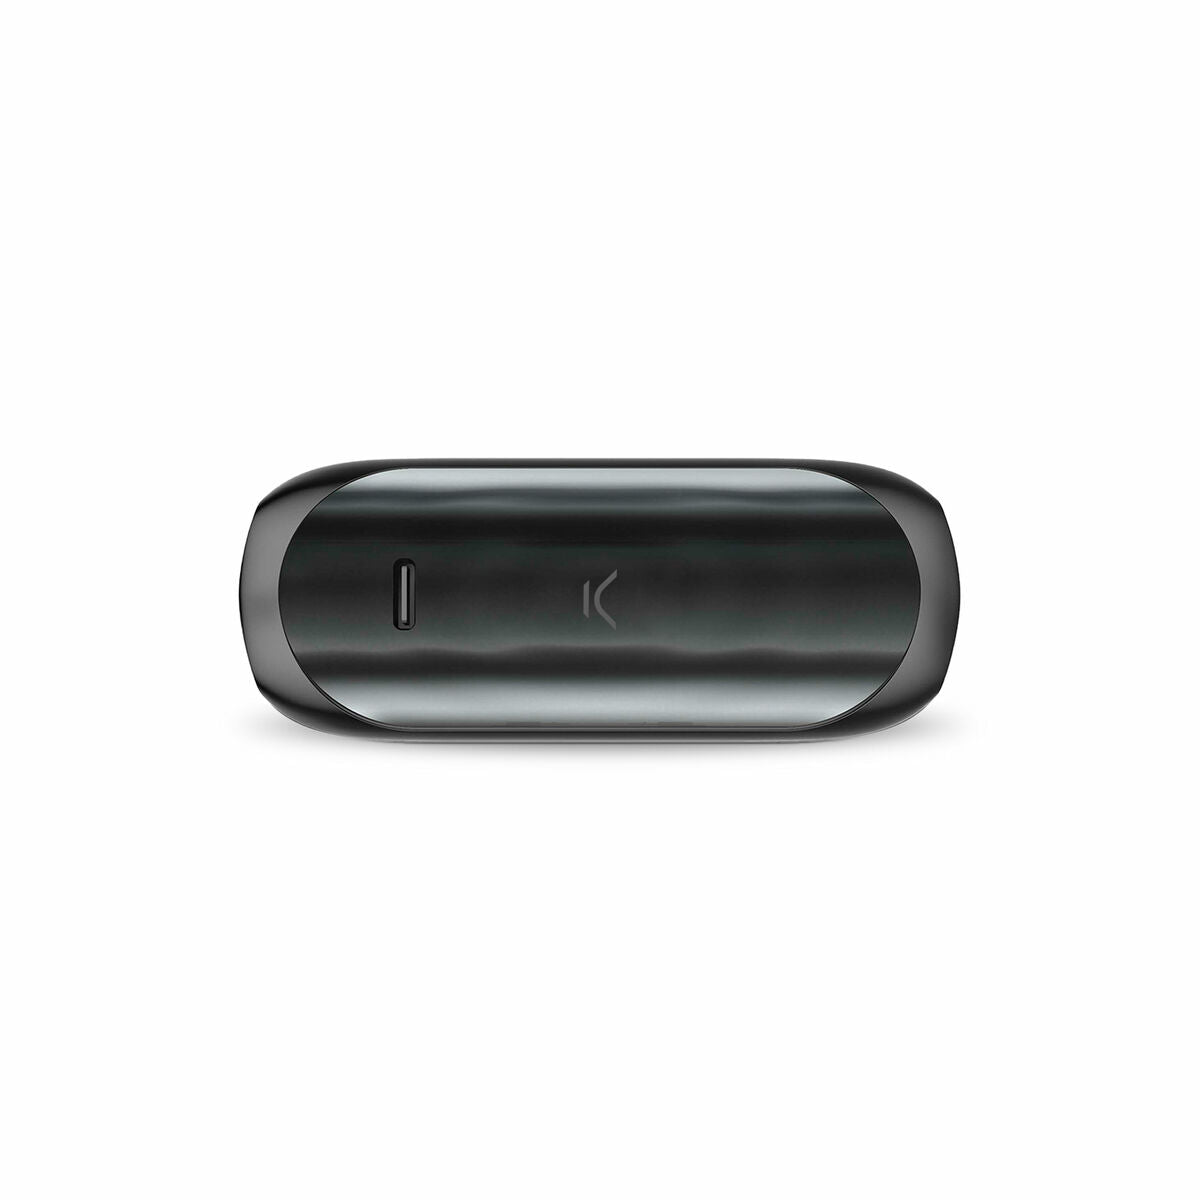 Wireless Headphones KSIX HALLEY, KSIX, Electronics, Mobile communication and accessories, wireless-headphones-ksix-halley, :Wireless Headphones, Brand_KSIX, category-reference-2609, category-reference-2642, category-reference-2847, category-reference-t-19653, category-reference-t-21312, category-reference-t-4036, category-reference-t-4037, computers / peripherals, Condition_NEW, entertainment, gadget, music, office, Price_20 - 50, telephones & tablets, Teleworking, RiotNook